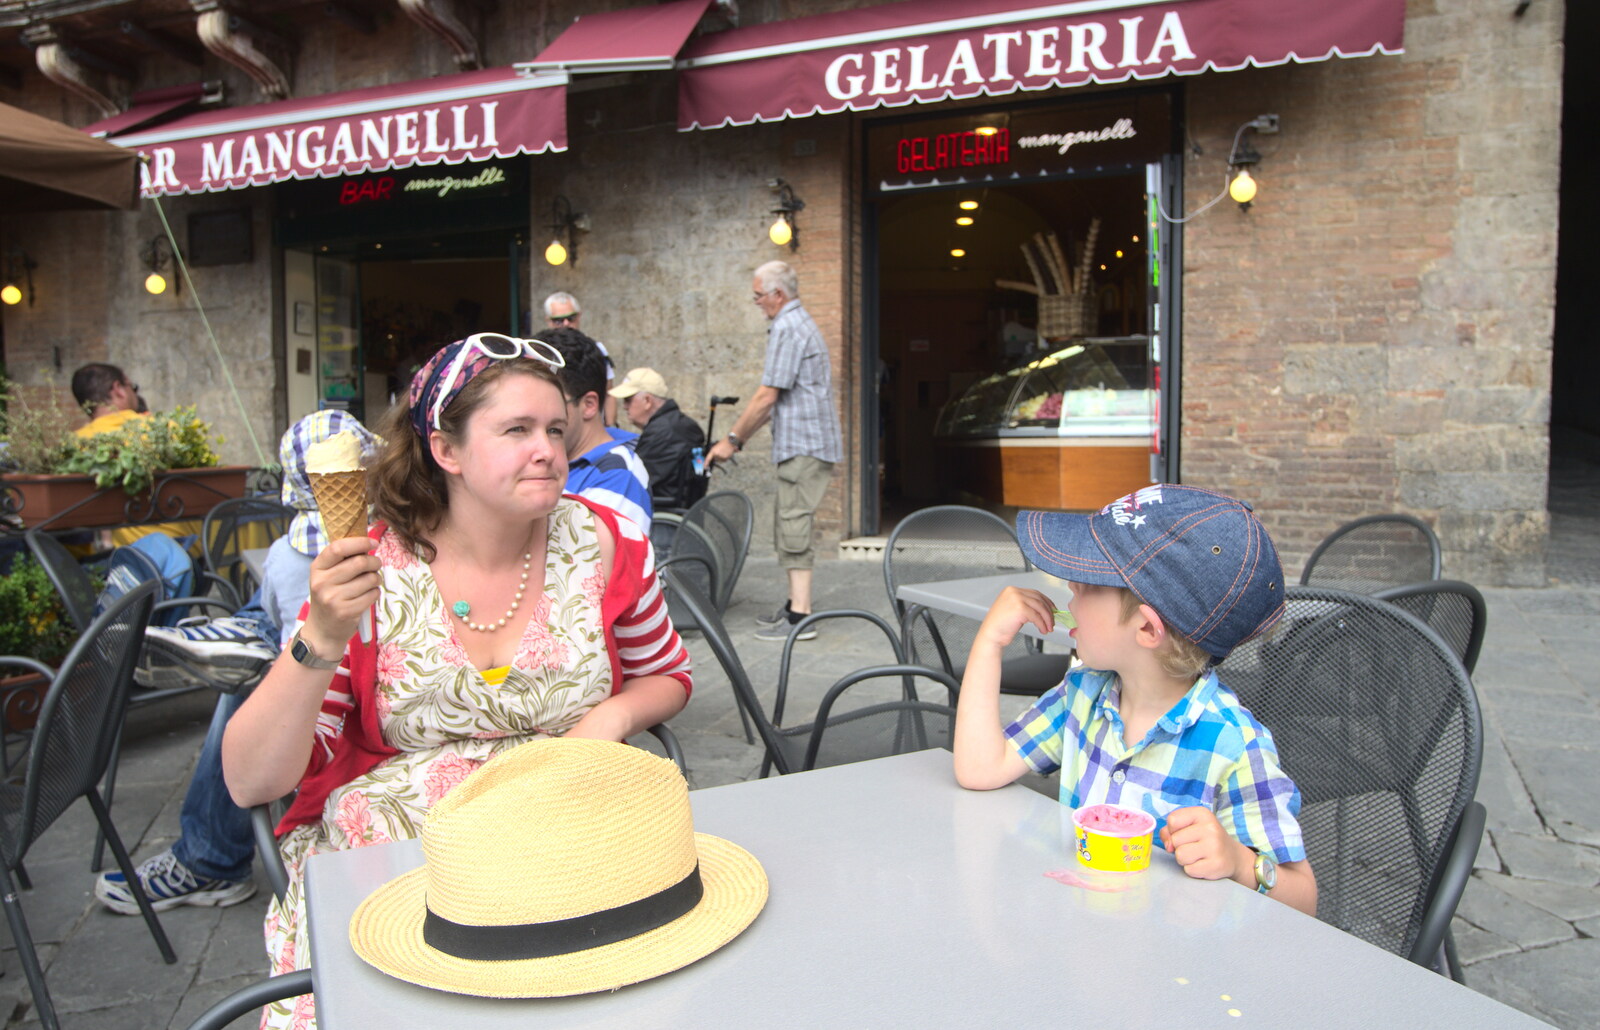 A Tuscan Winery and a Trip to Siena, Tuscany, Italy - 10th June 2013: Isobel and Fred eat more gelato